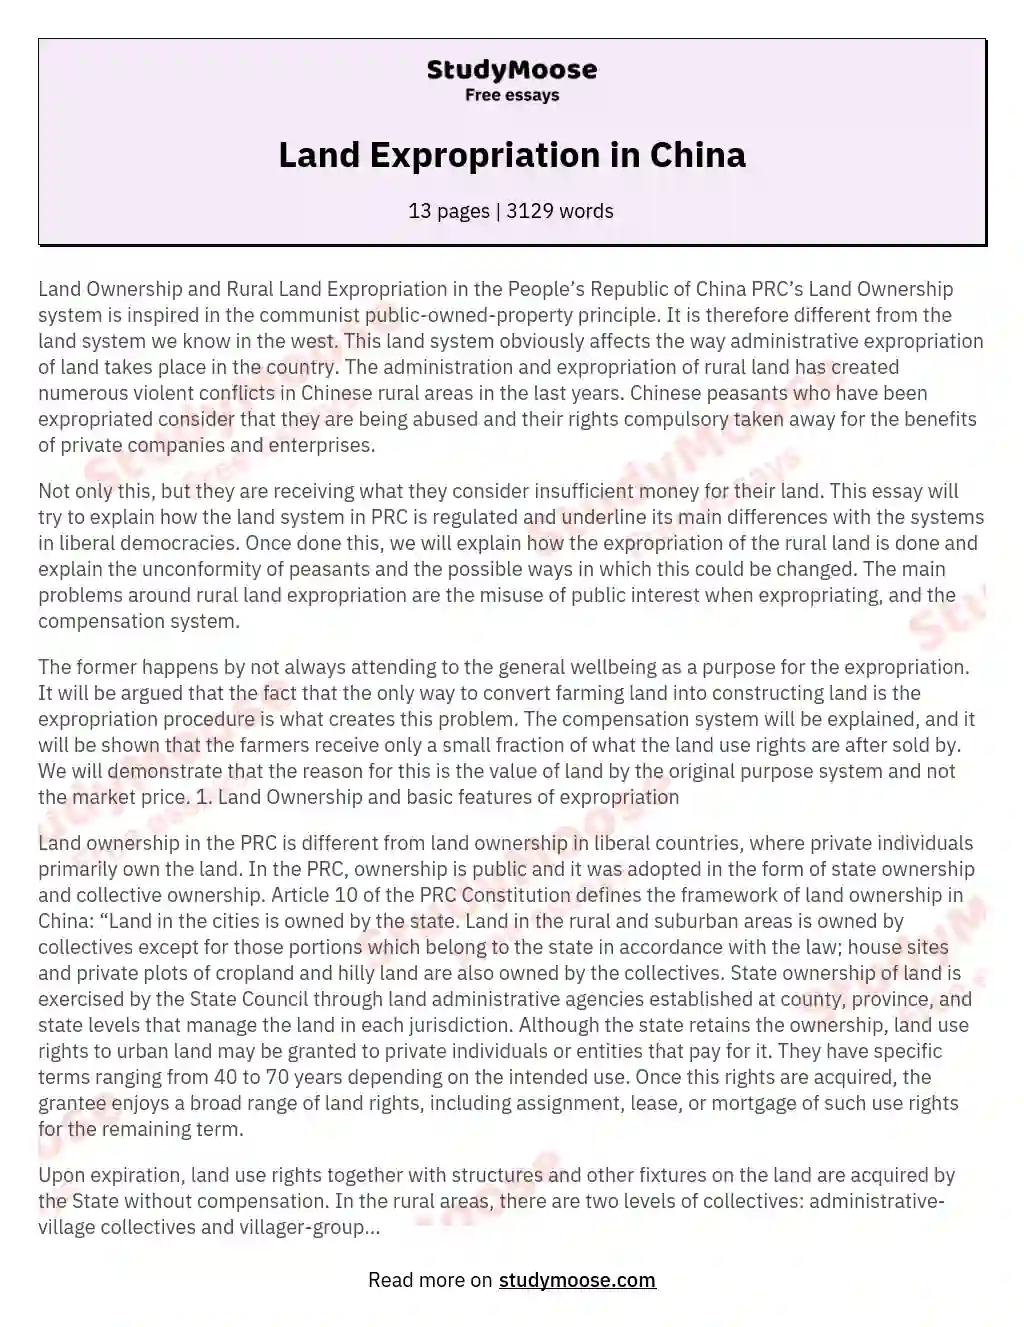 Land Expropriation in China